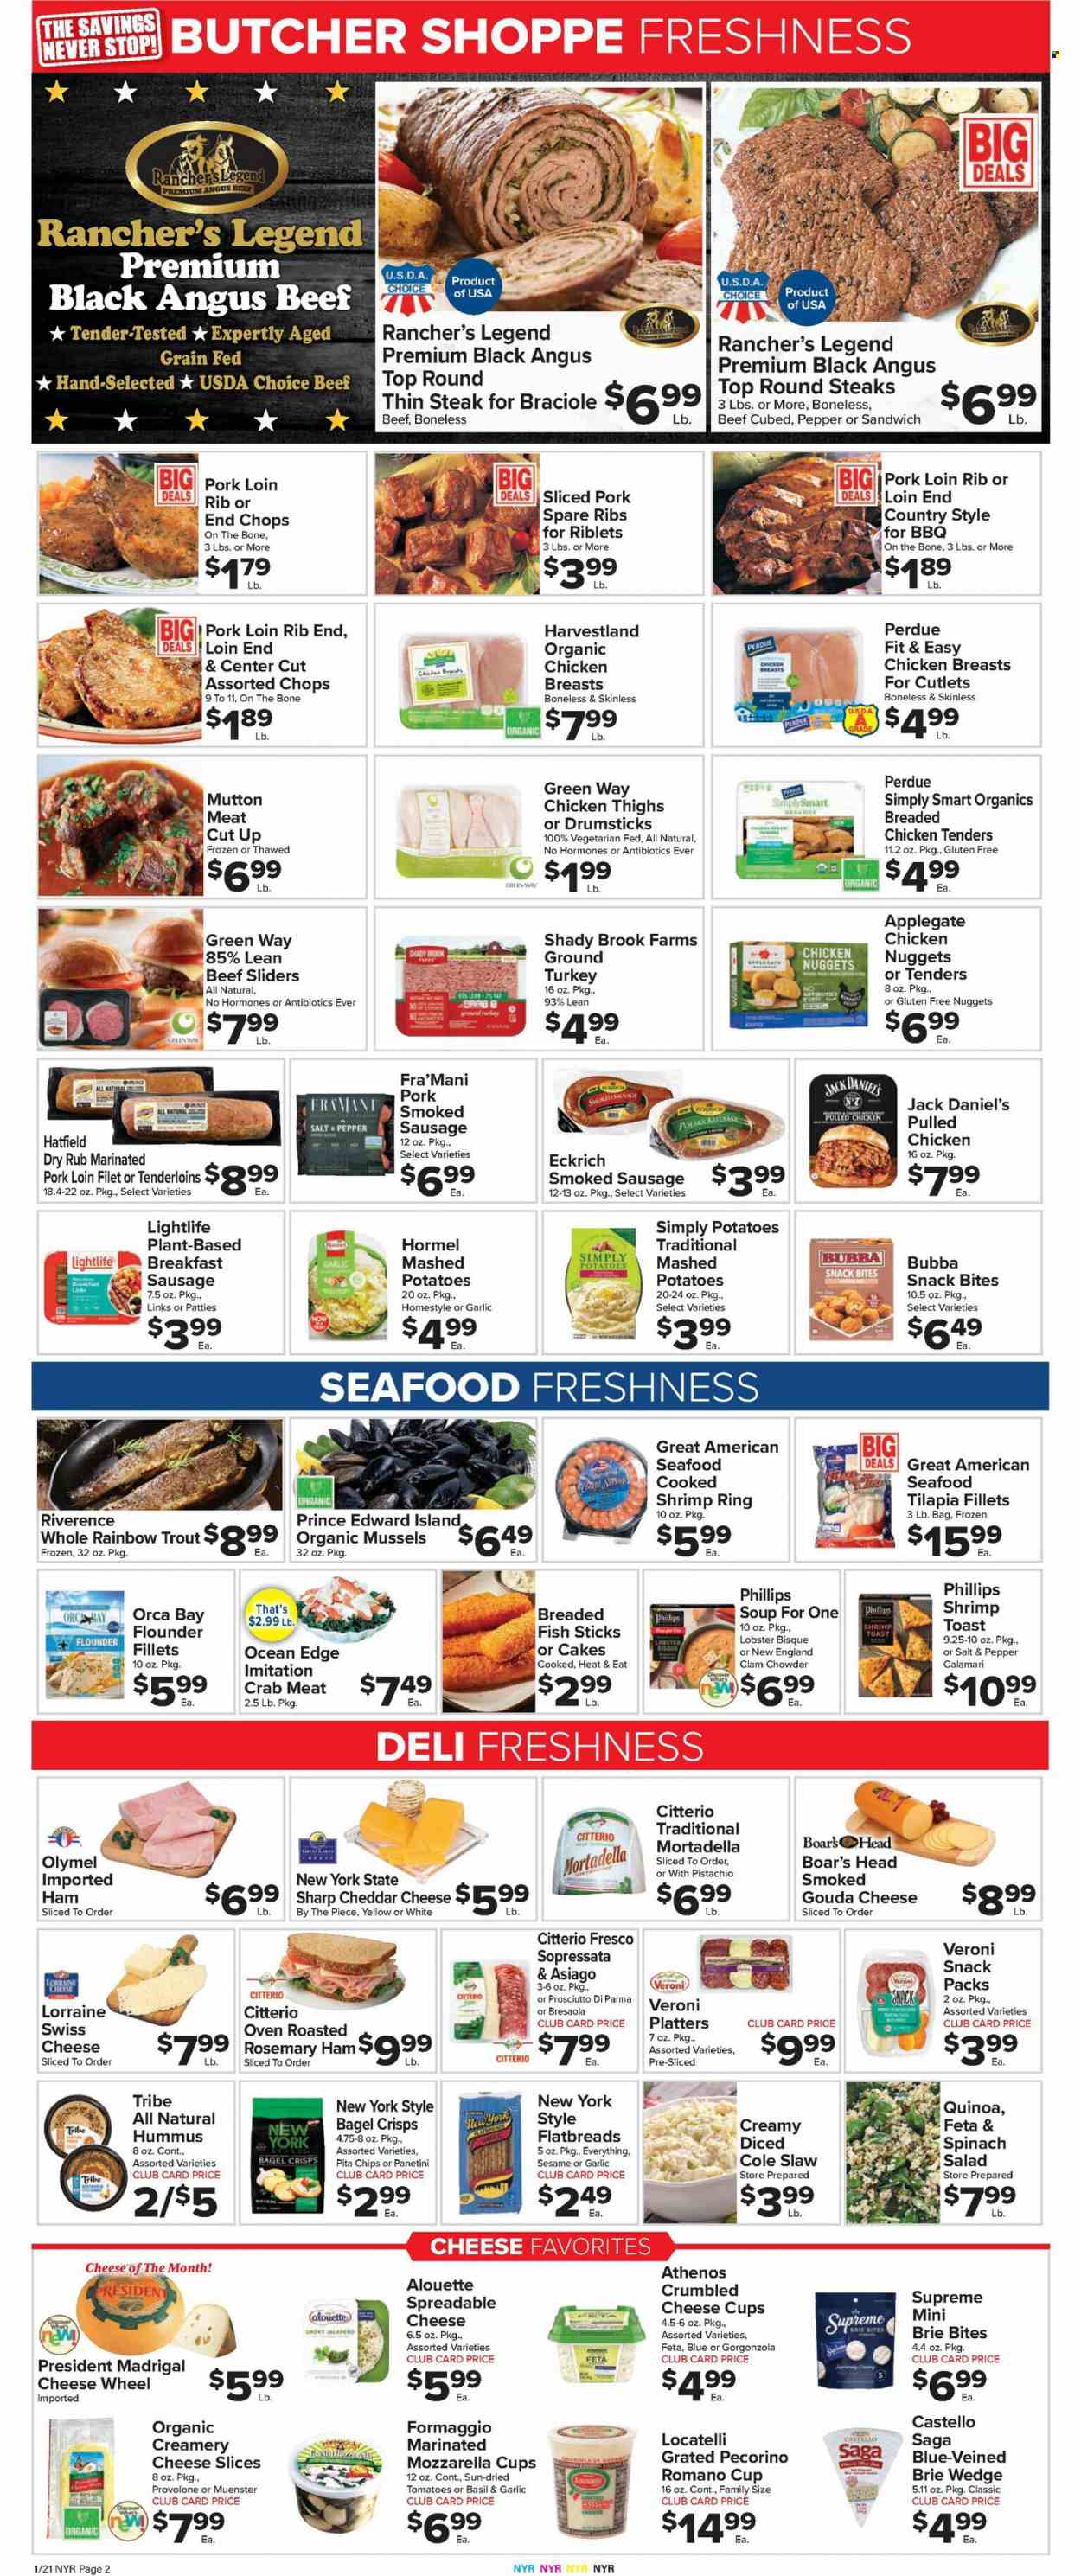 thumbnail - Foodtown Flyer - 01/21/2022 - 01/27/2022 - Sales products - cake, salad, jalapeño, calamari, crab meat, flounder, lobster, mussels, tilapia, trout, seafood, crab, fish, shrimps, Orca Bay, fish fingers, fish sticks, mashed potatoes, Jack Daniel's, soup, nuggets, fried chicken, chicken nuggets, Perdue®, breaded fish, pulled chicken, Hormel, mortadella, ham, smoked sausage, chicken sausage, hummus, asiago, gouda, mozzarella, sliced cheese, swiss cheese, cheese cup, Pecorino, cheese, brie, gorgonzola, Münster cheese, Président, feta, Provolone, snack, bagel crisps, pita chips, dried tomatoes, clam chowder, quinoa, esponja, rosemary, ground chicken, chicken thighs, beef meat, steak, pork loin, pork meat, pork ribs, pork spare ribs, marinated pork, mutton meat, cup. Page 4.